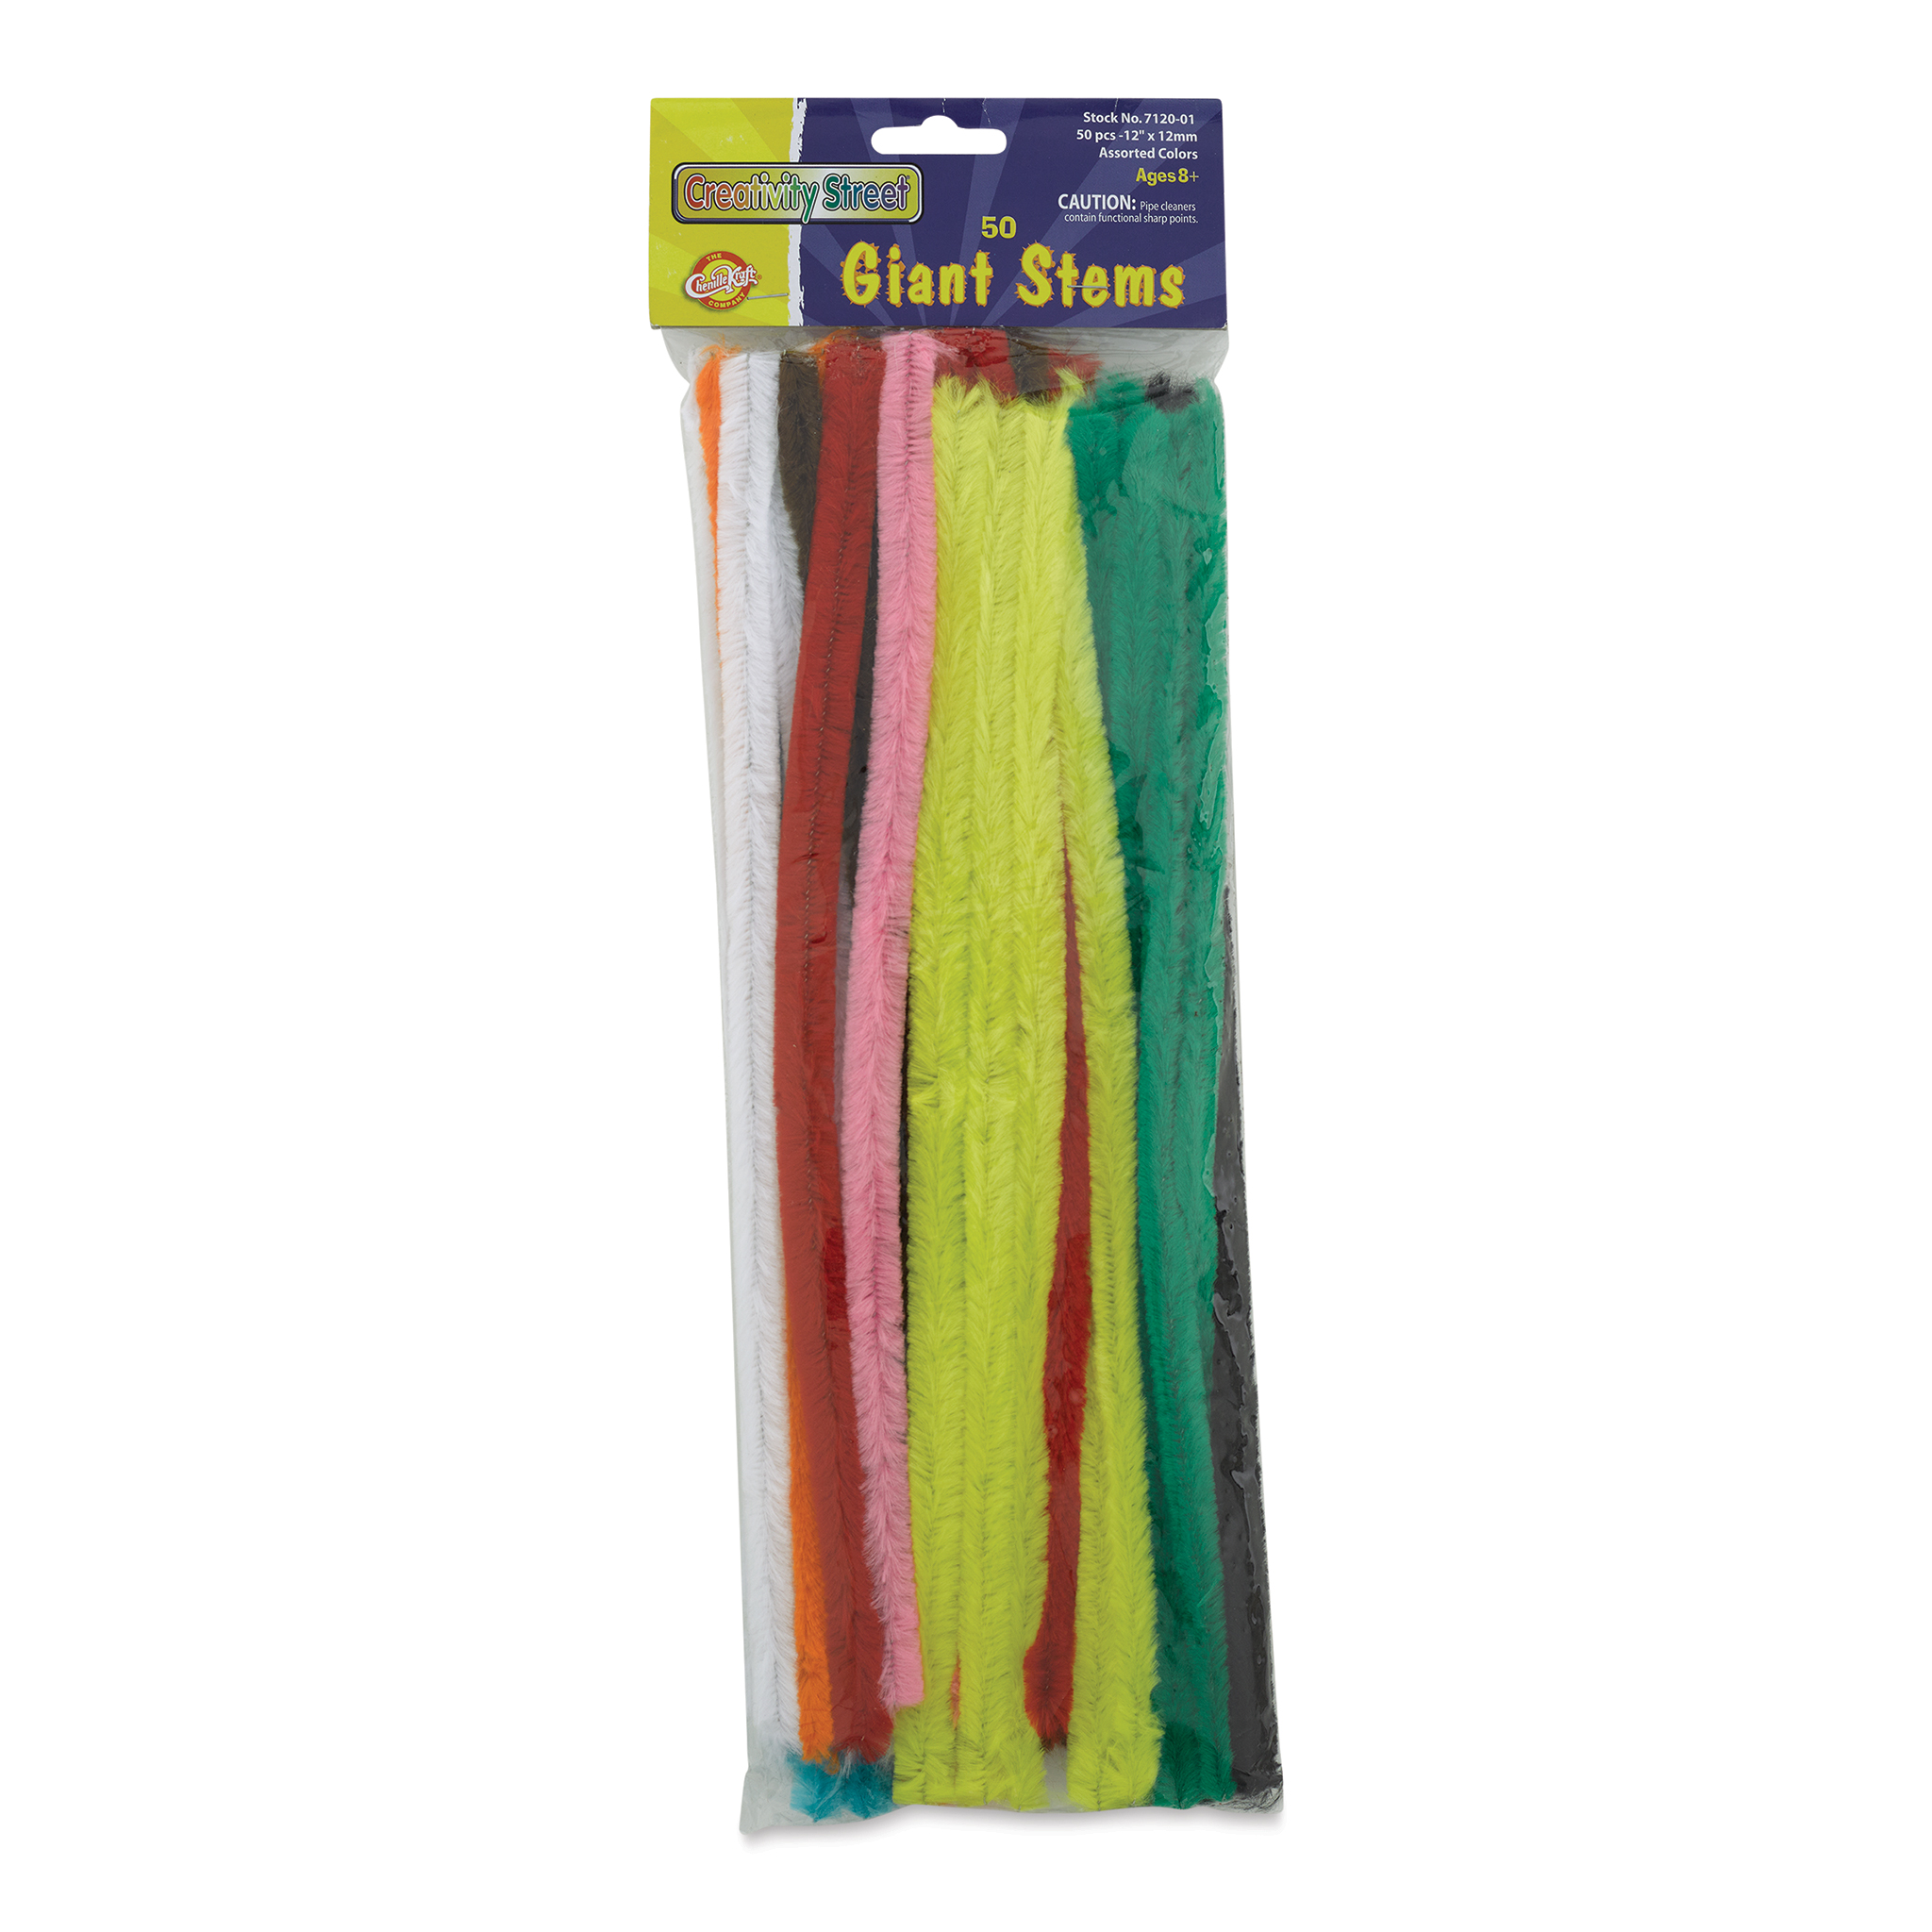 Super Colossal Pipe Cleaners